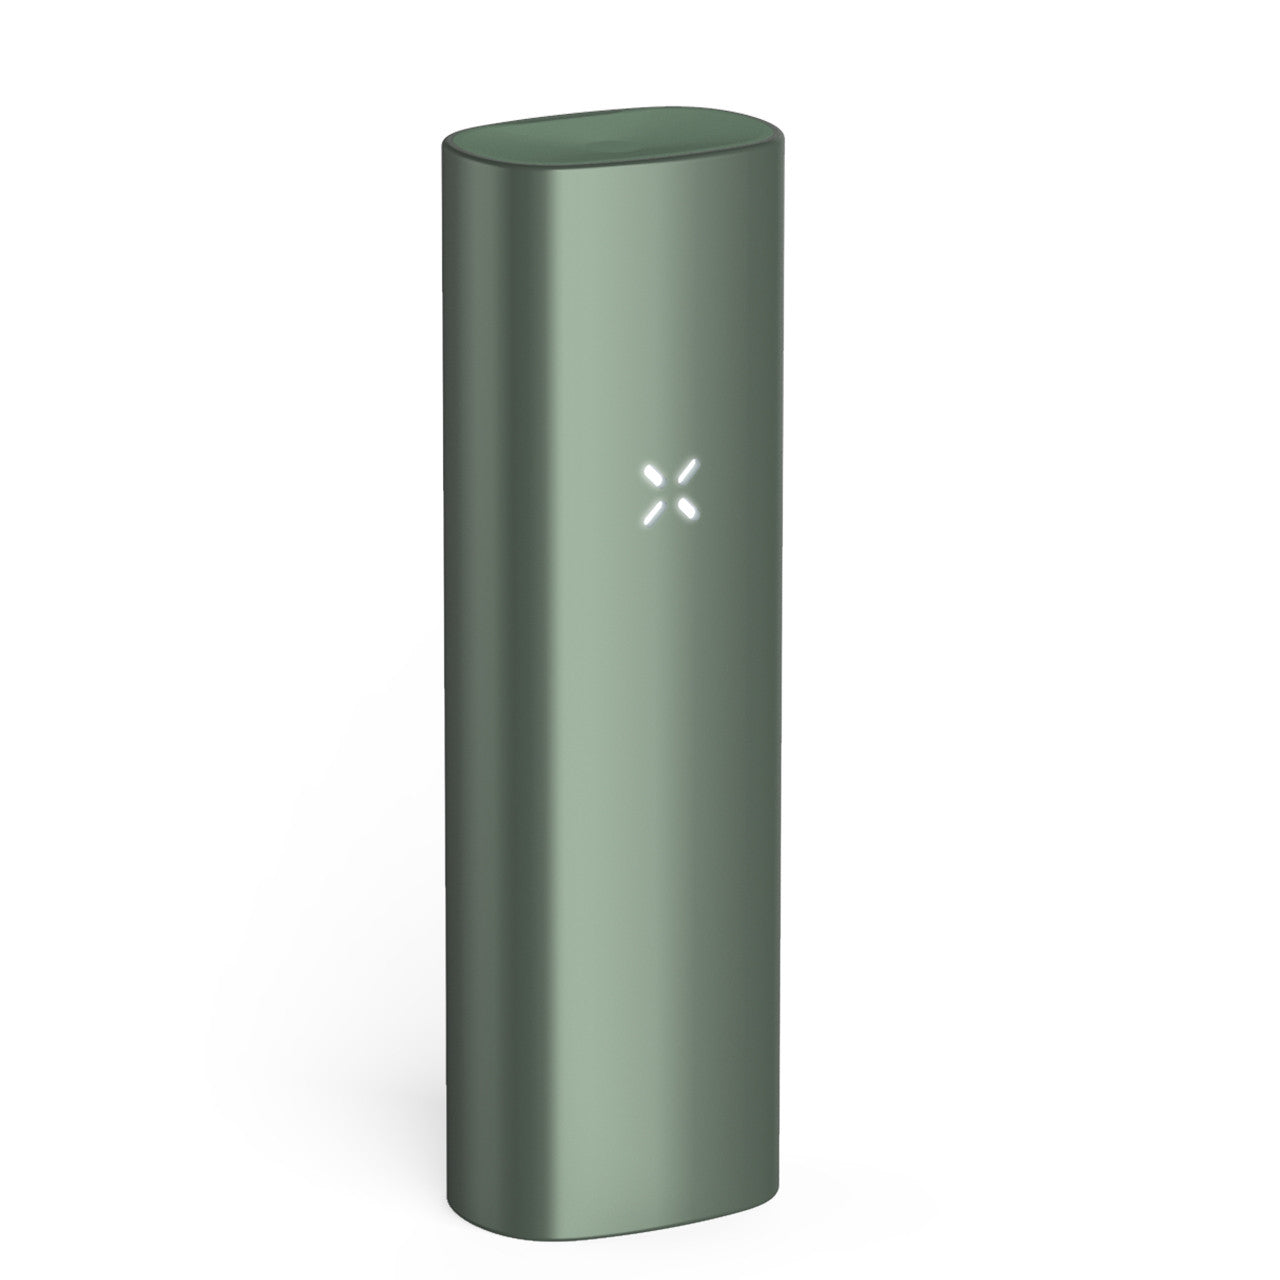 PAX Plus Basic Kit for Dry Herb and Concentrate - Onyx